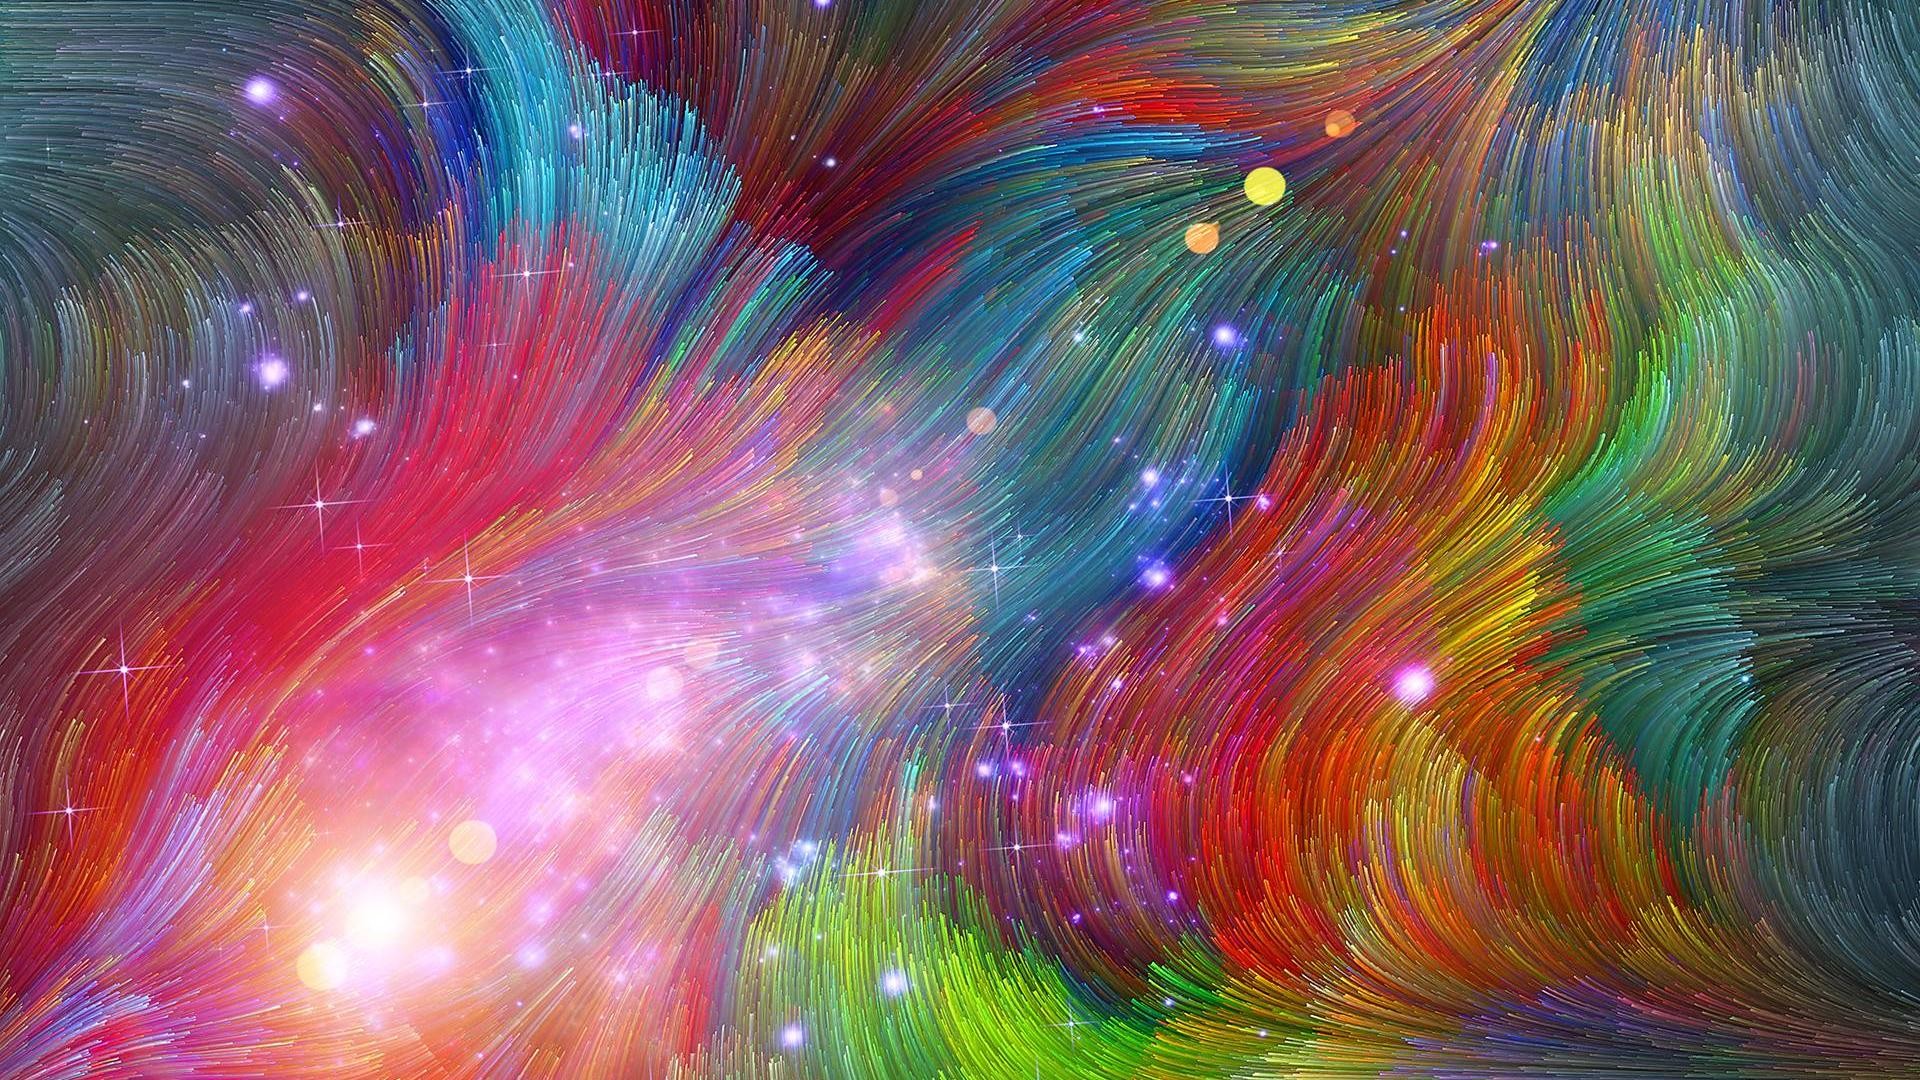 Trippy Galaxy Wallpaper by HD Wallpapers Daily